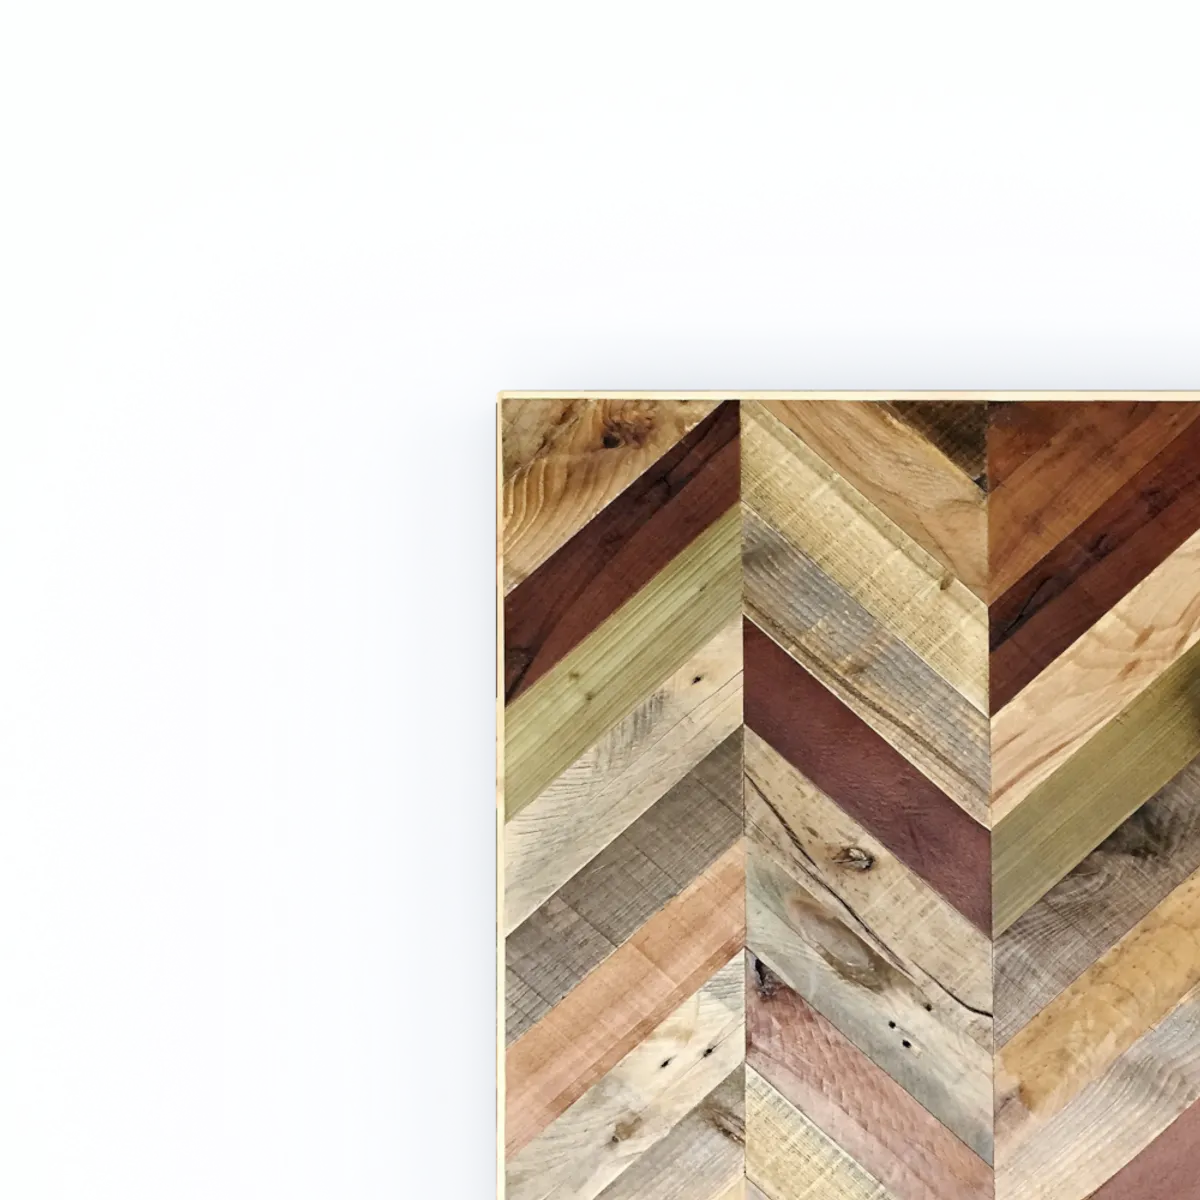 Reclaimed Chevron Table Top Thin Border Inside Out Contracts